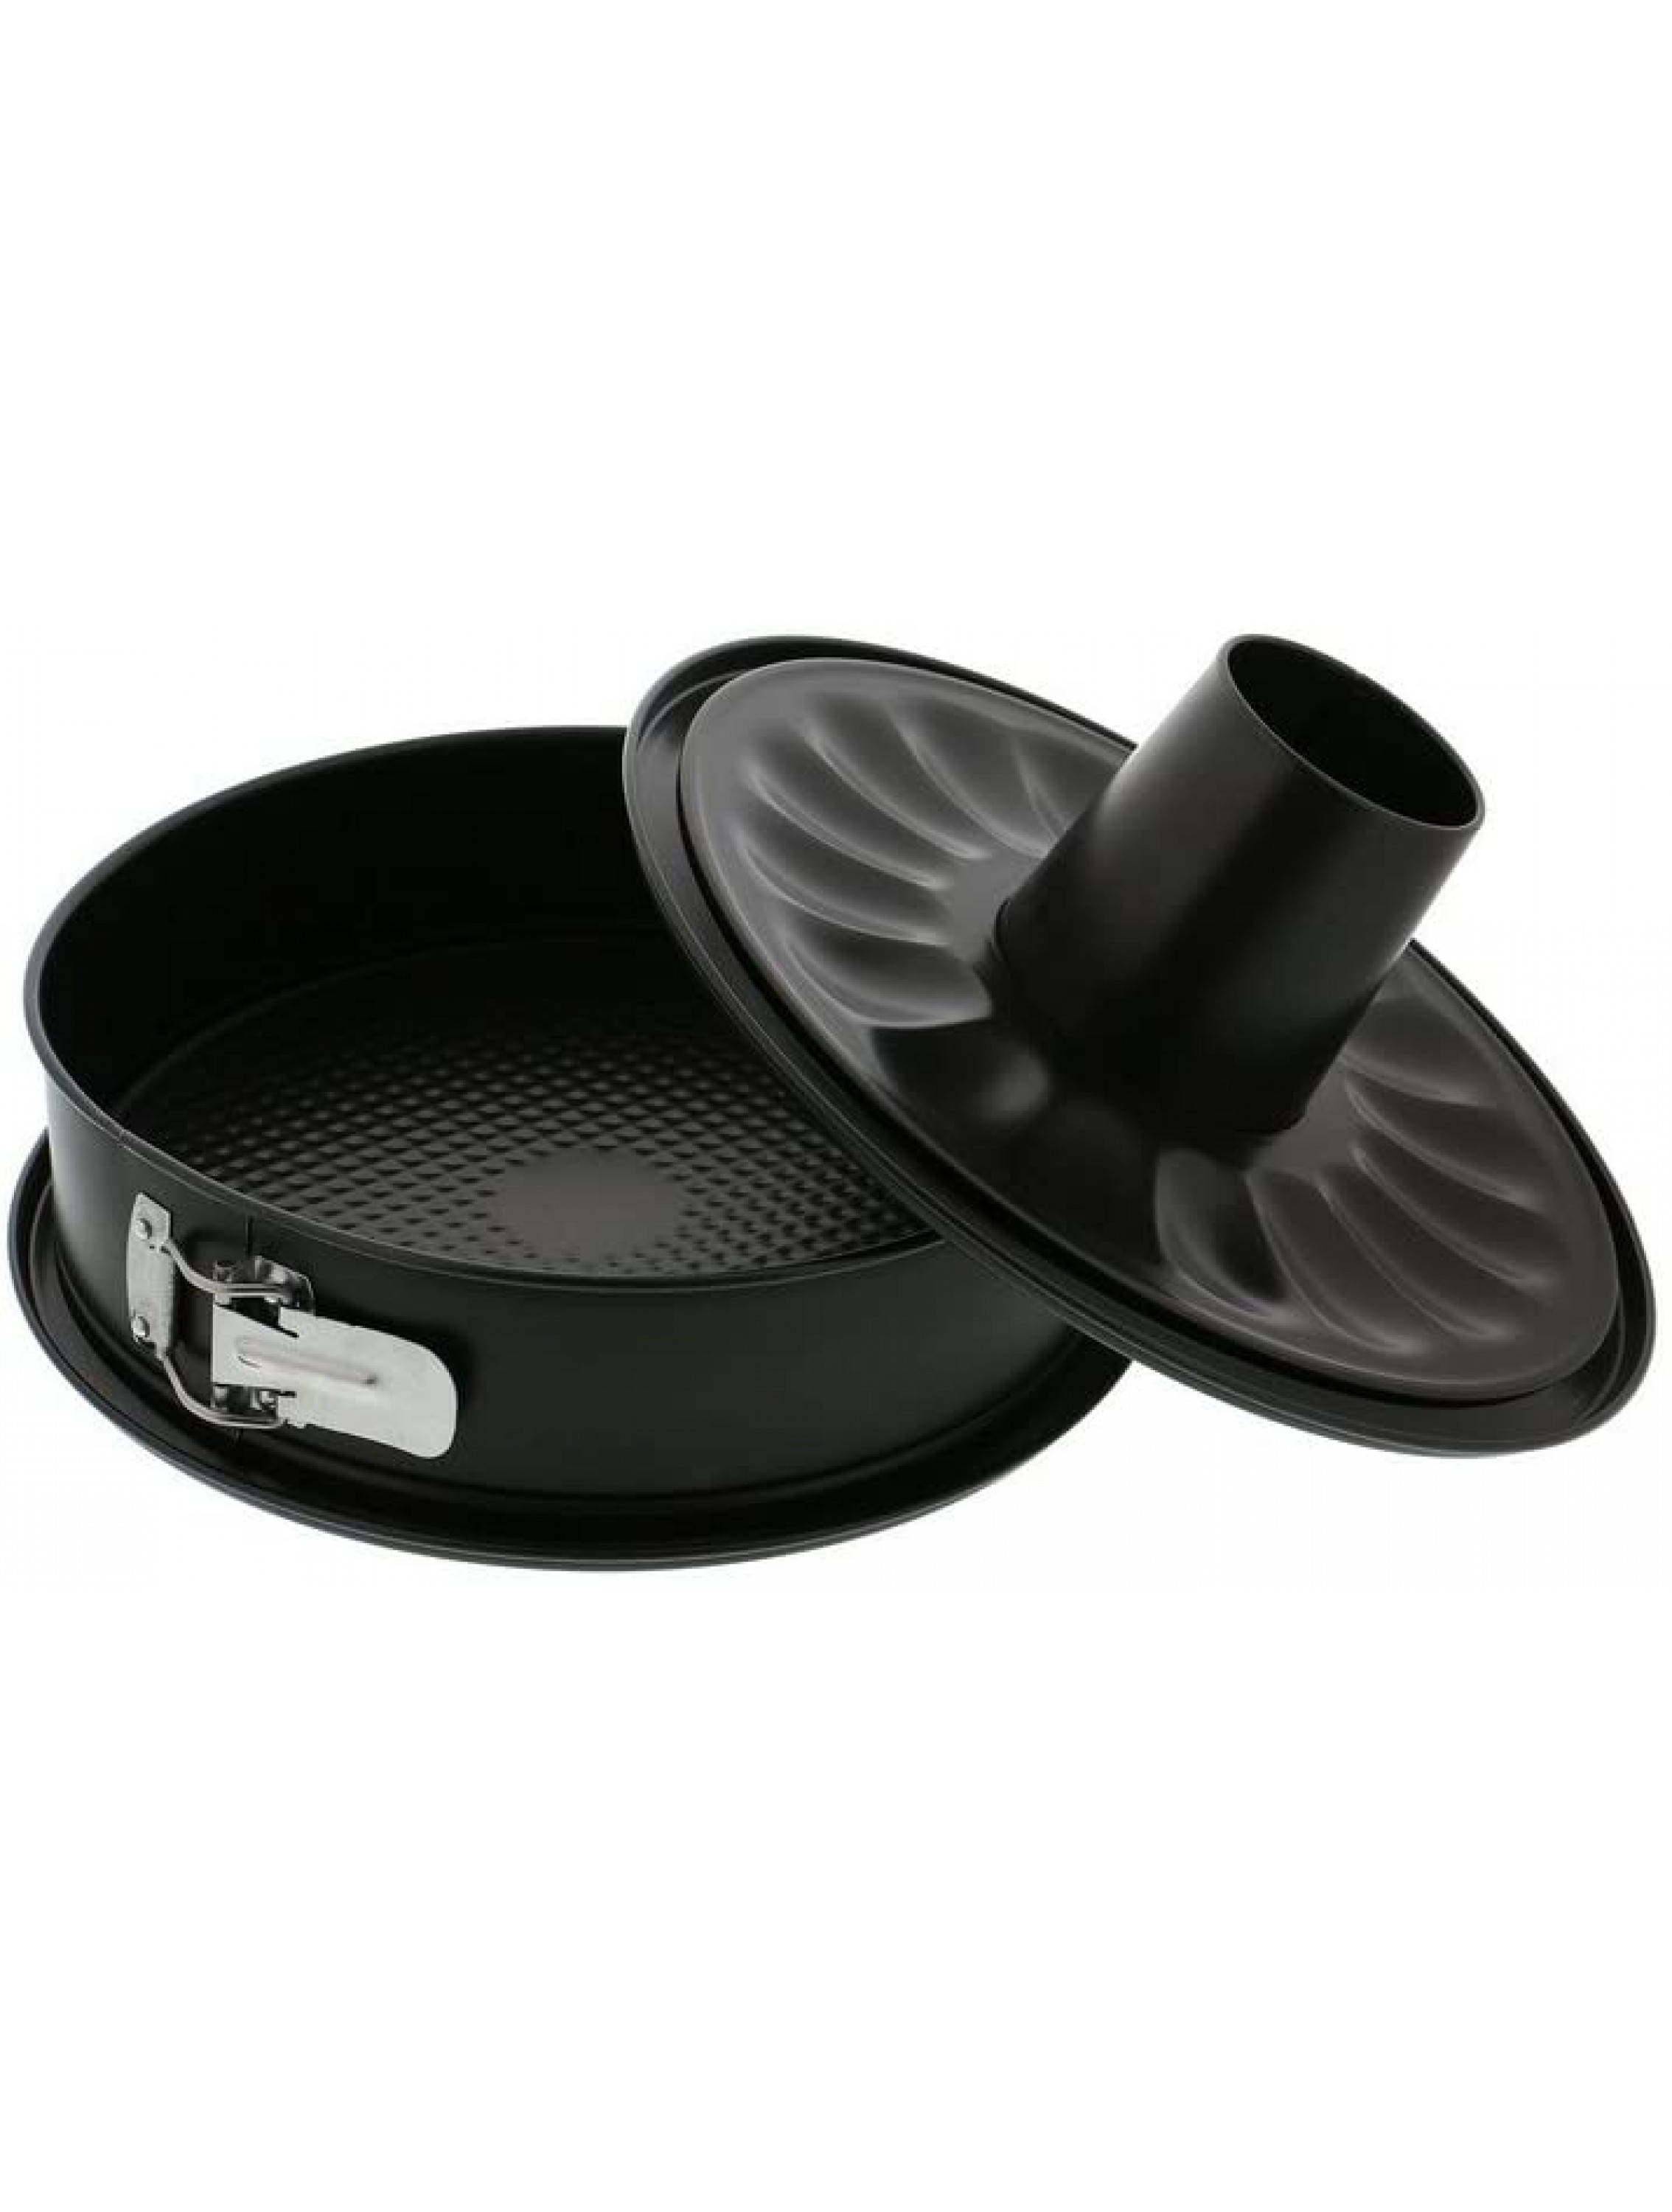 Ballarini La Patisserie Nonstick 10-inch Springform Pan with 2 Bases Made in Italy - BVG9R0ALB